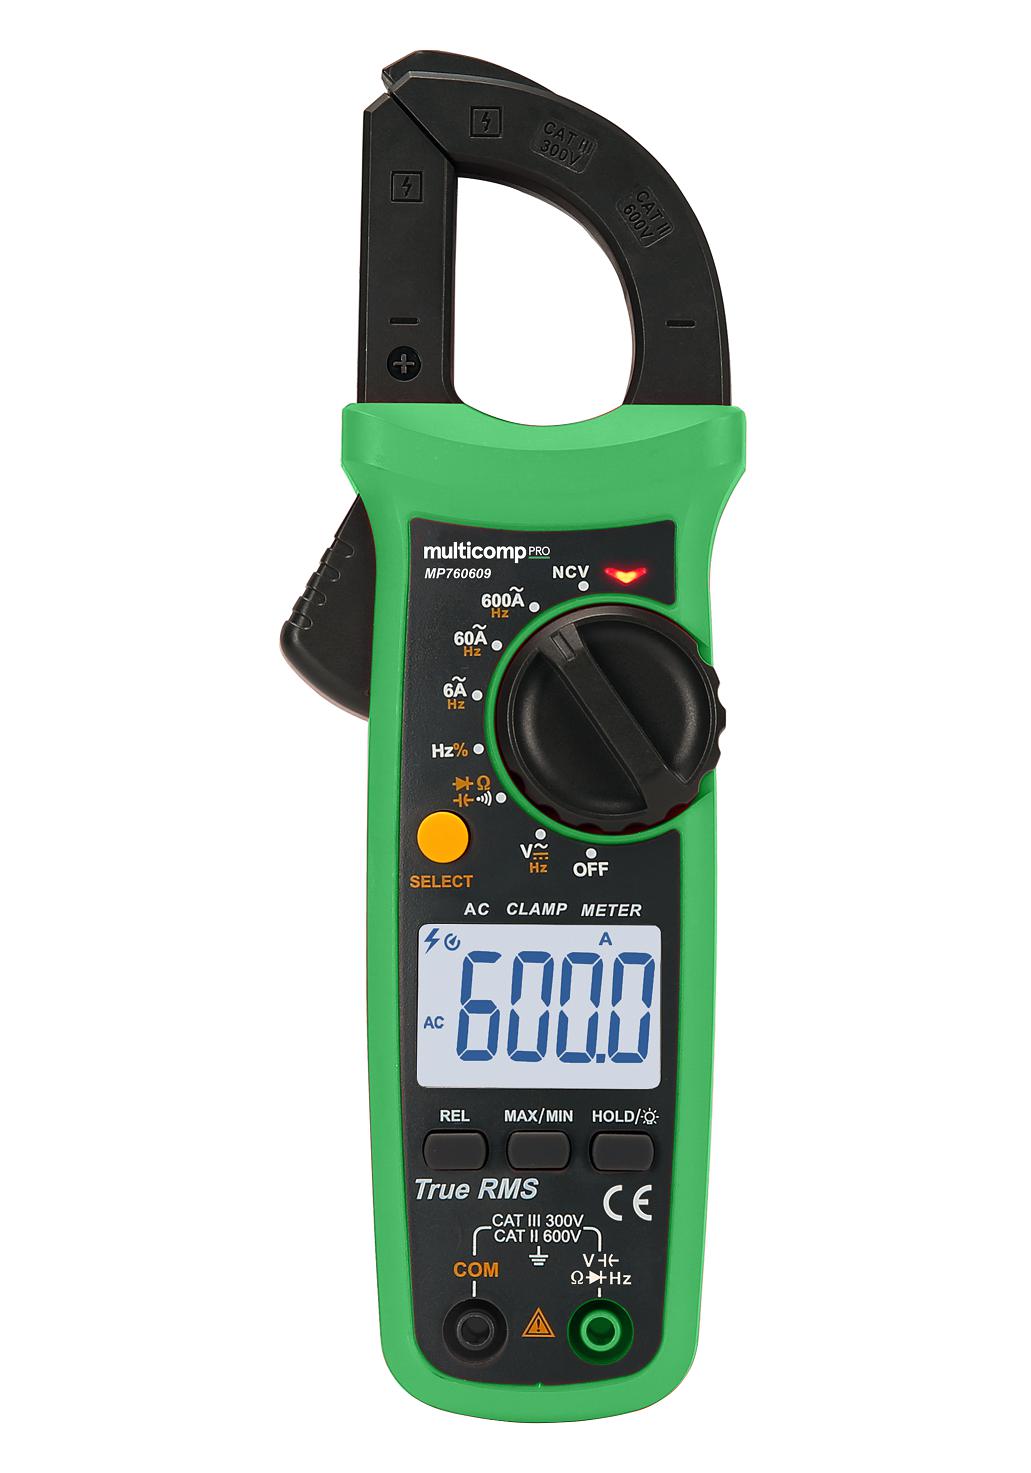 MP760609 DIG CLAMP MULTIMETER, 6000 COUNT, 600A MULTICOMP PRO